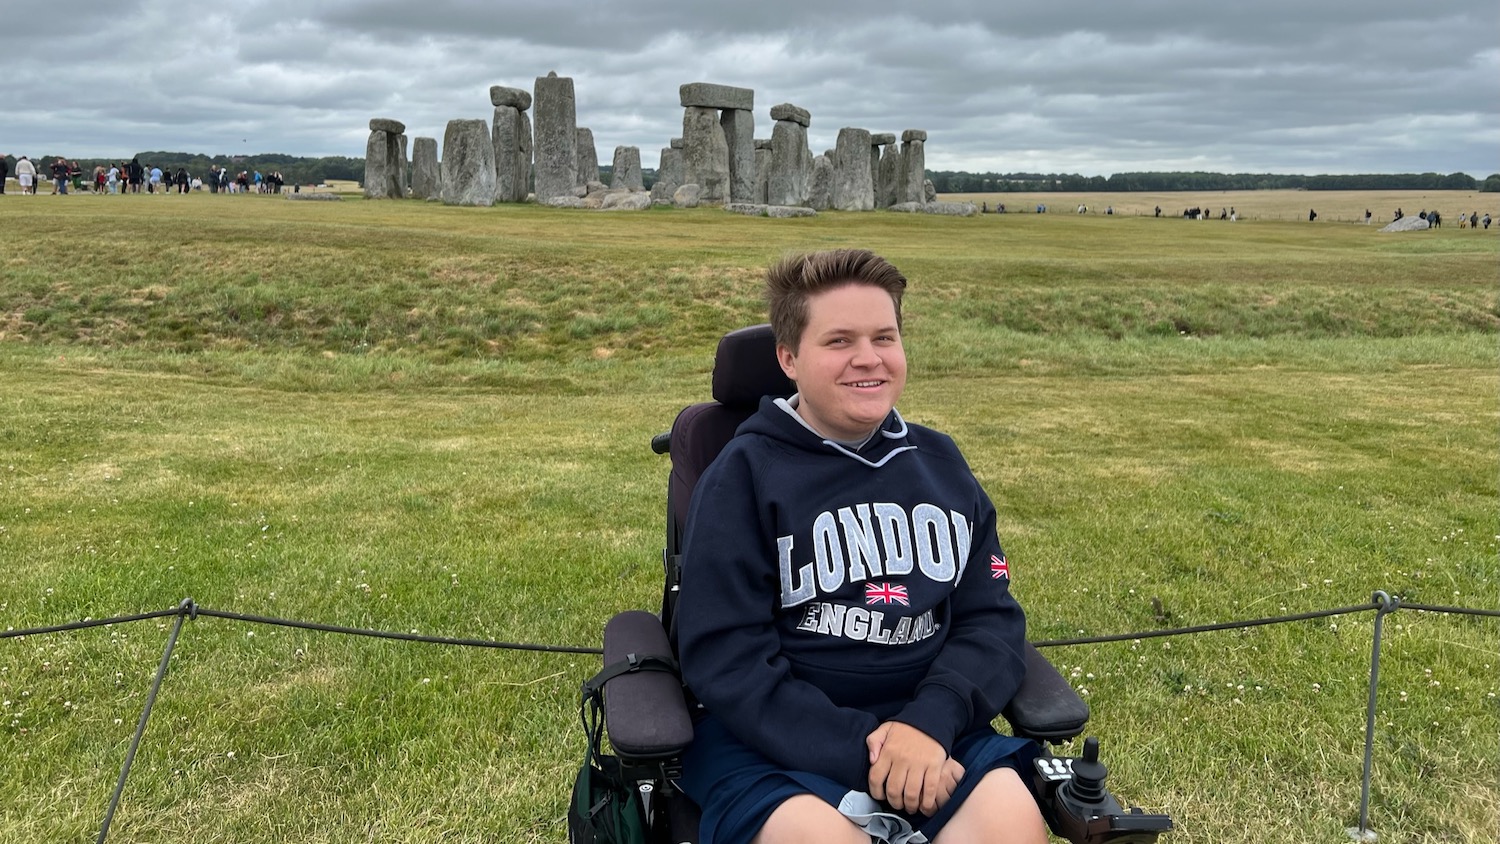 Jack Bolton poses for a photo wearing a dark blue sweatshirt. The ruins of Stonehenge are in the background.